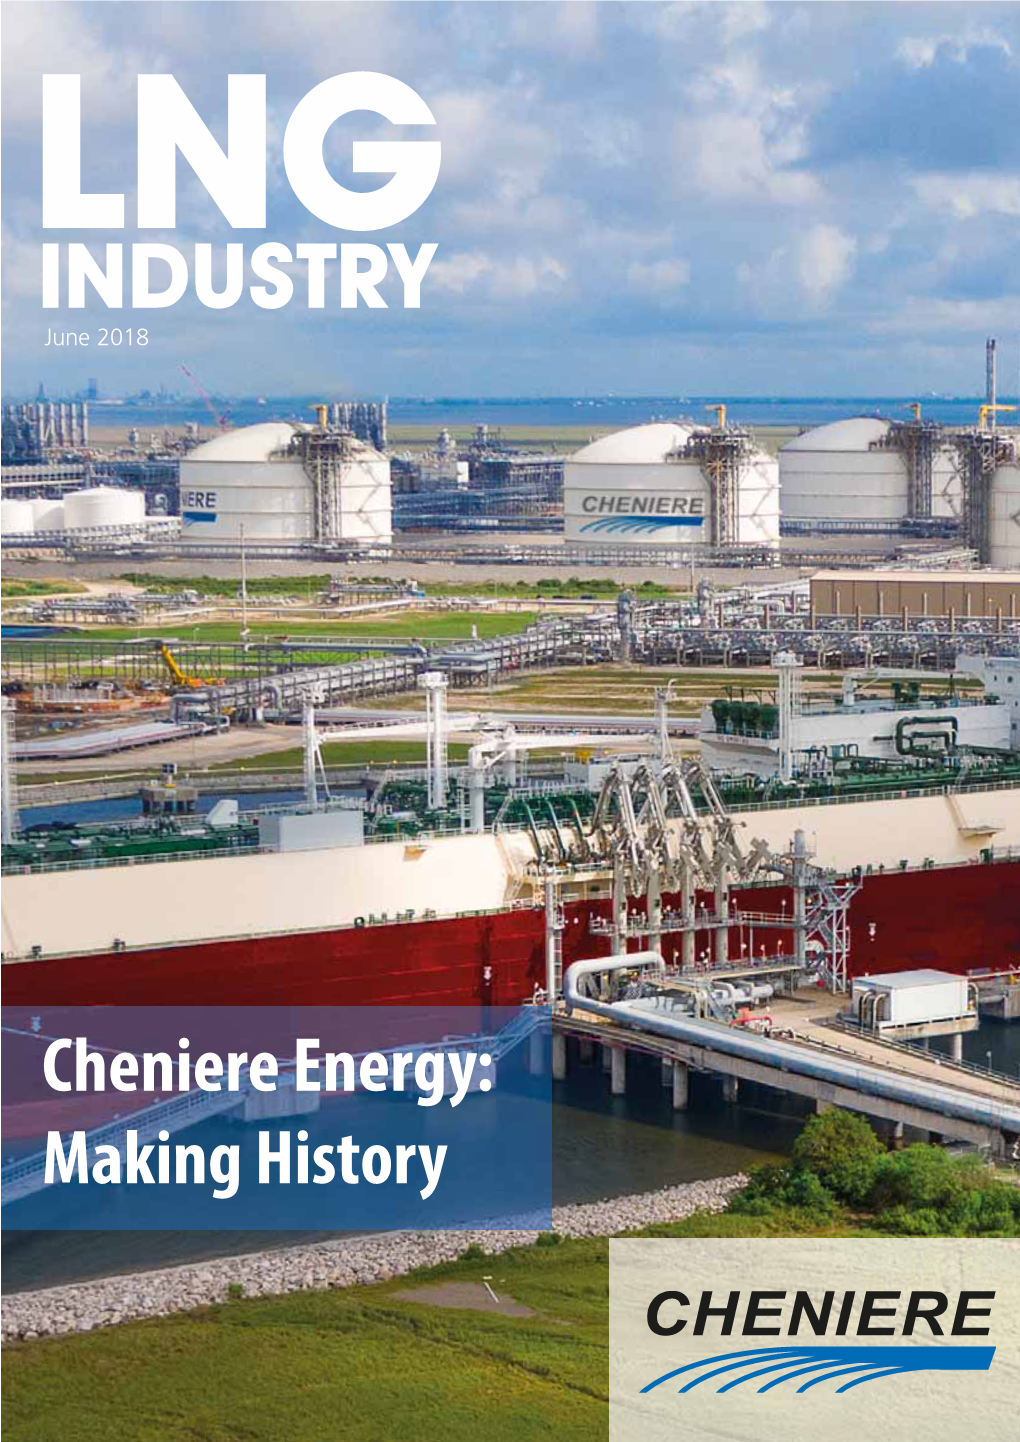 Cheniere Energy: Making History the Right Choice When Ambient Conditions Turn Explosive